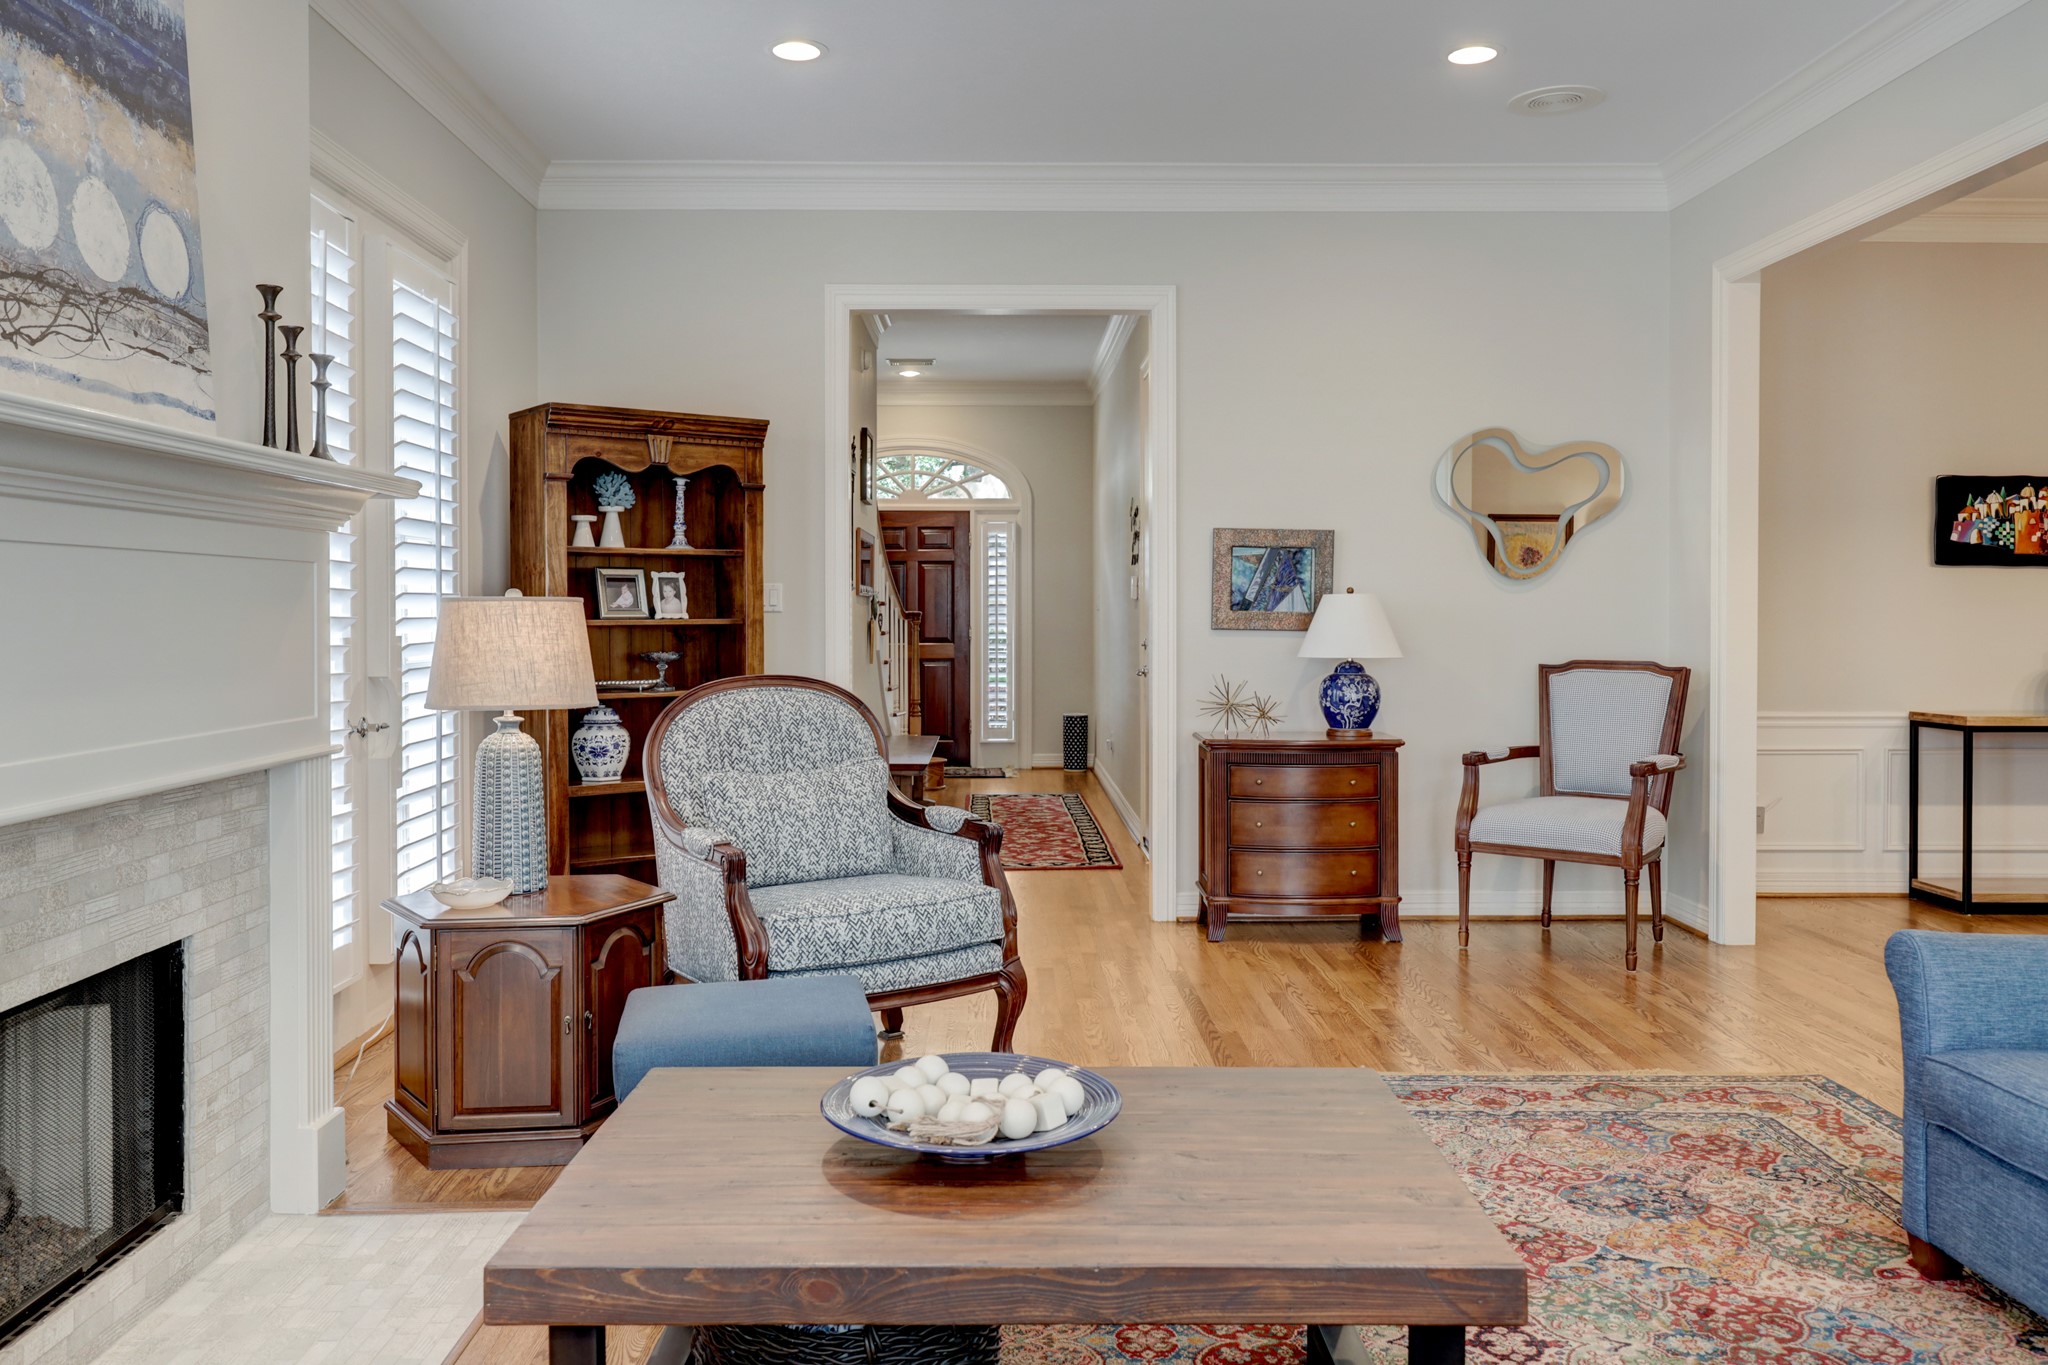 This view of the family room shows the foyer and entry. The powder room is conveniently tucked under the stairs of the entry hall.